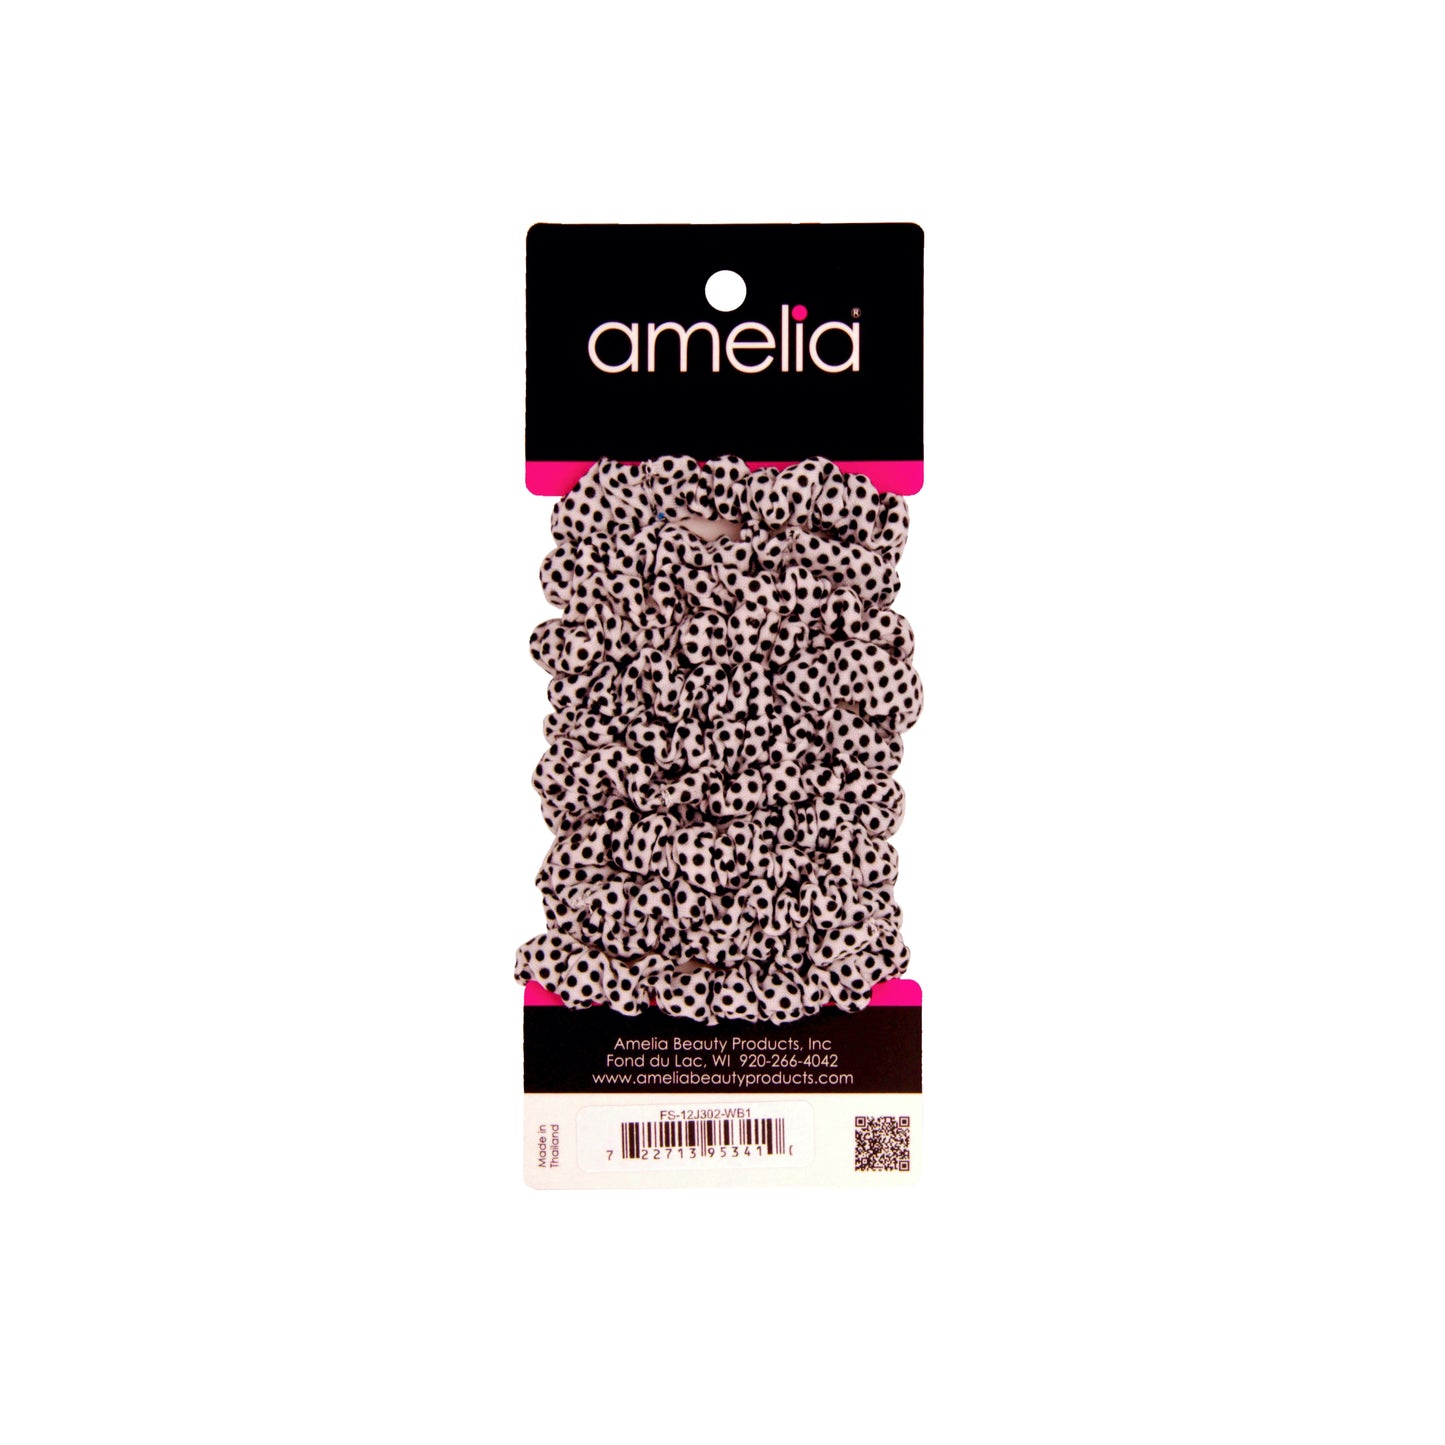 Amelia Beauty, White/Black Stripe Jersey Scrunchies, 2.25in Diameter, Gentle on Hair, Strong Hold, No Snag, No Dents or Creases. 12 Pack